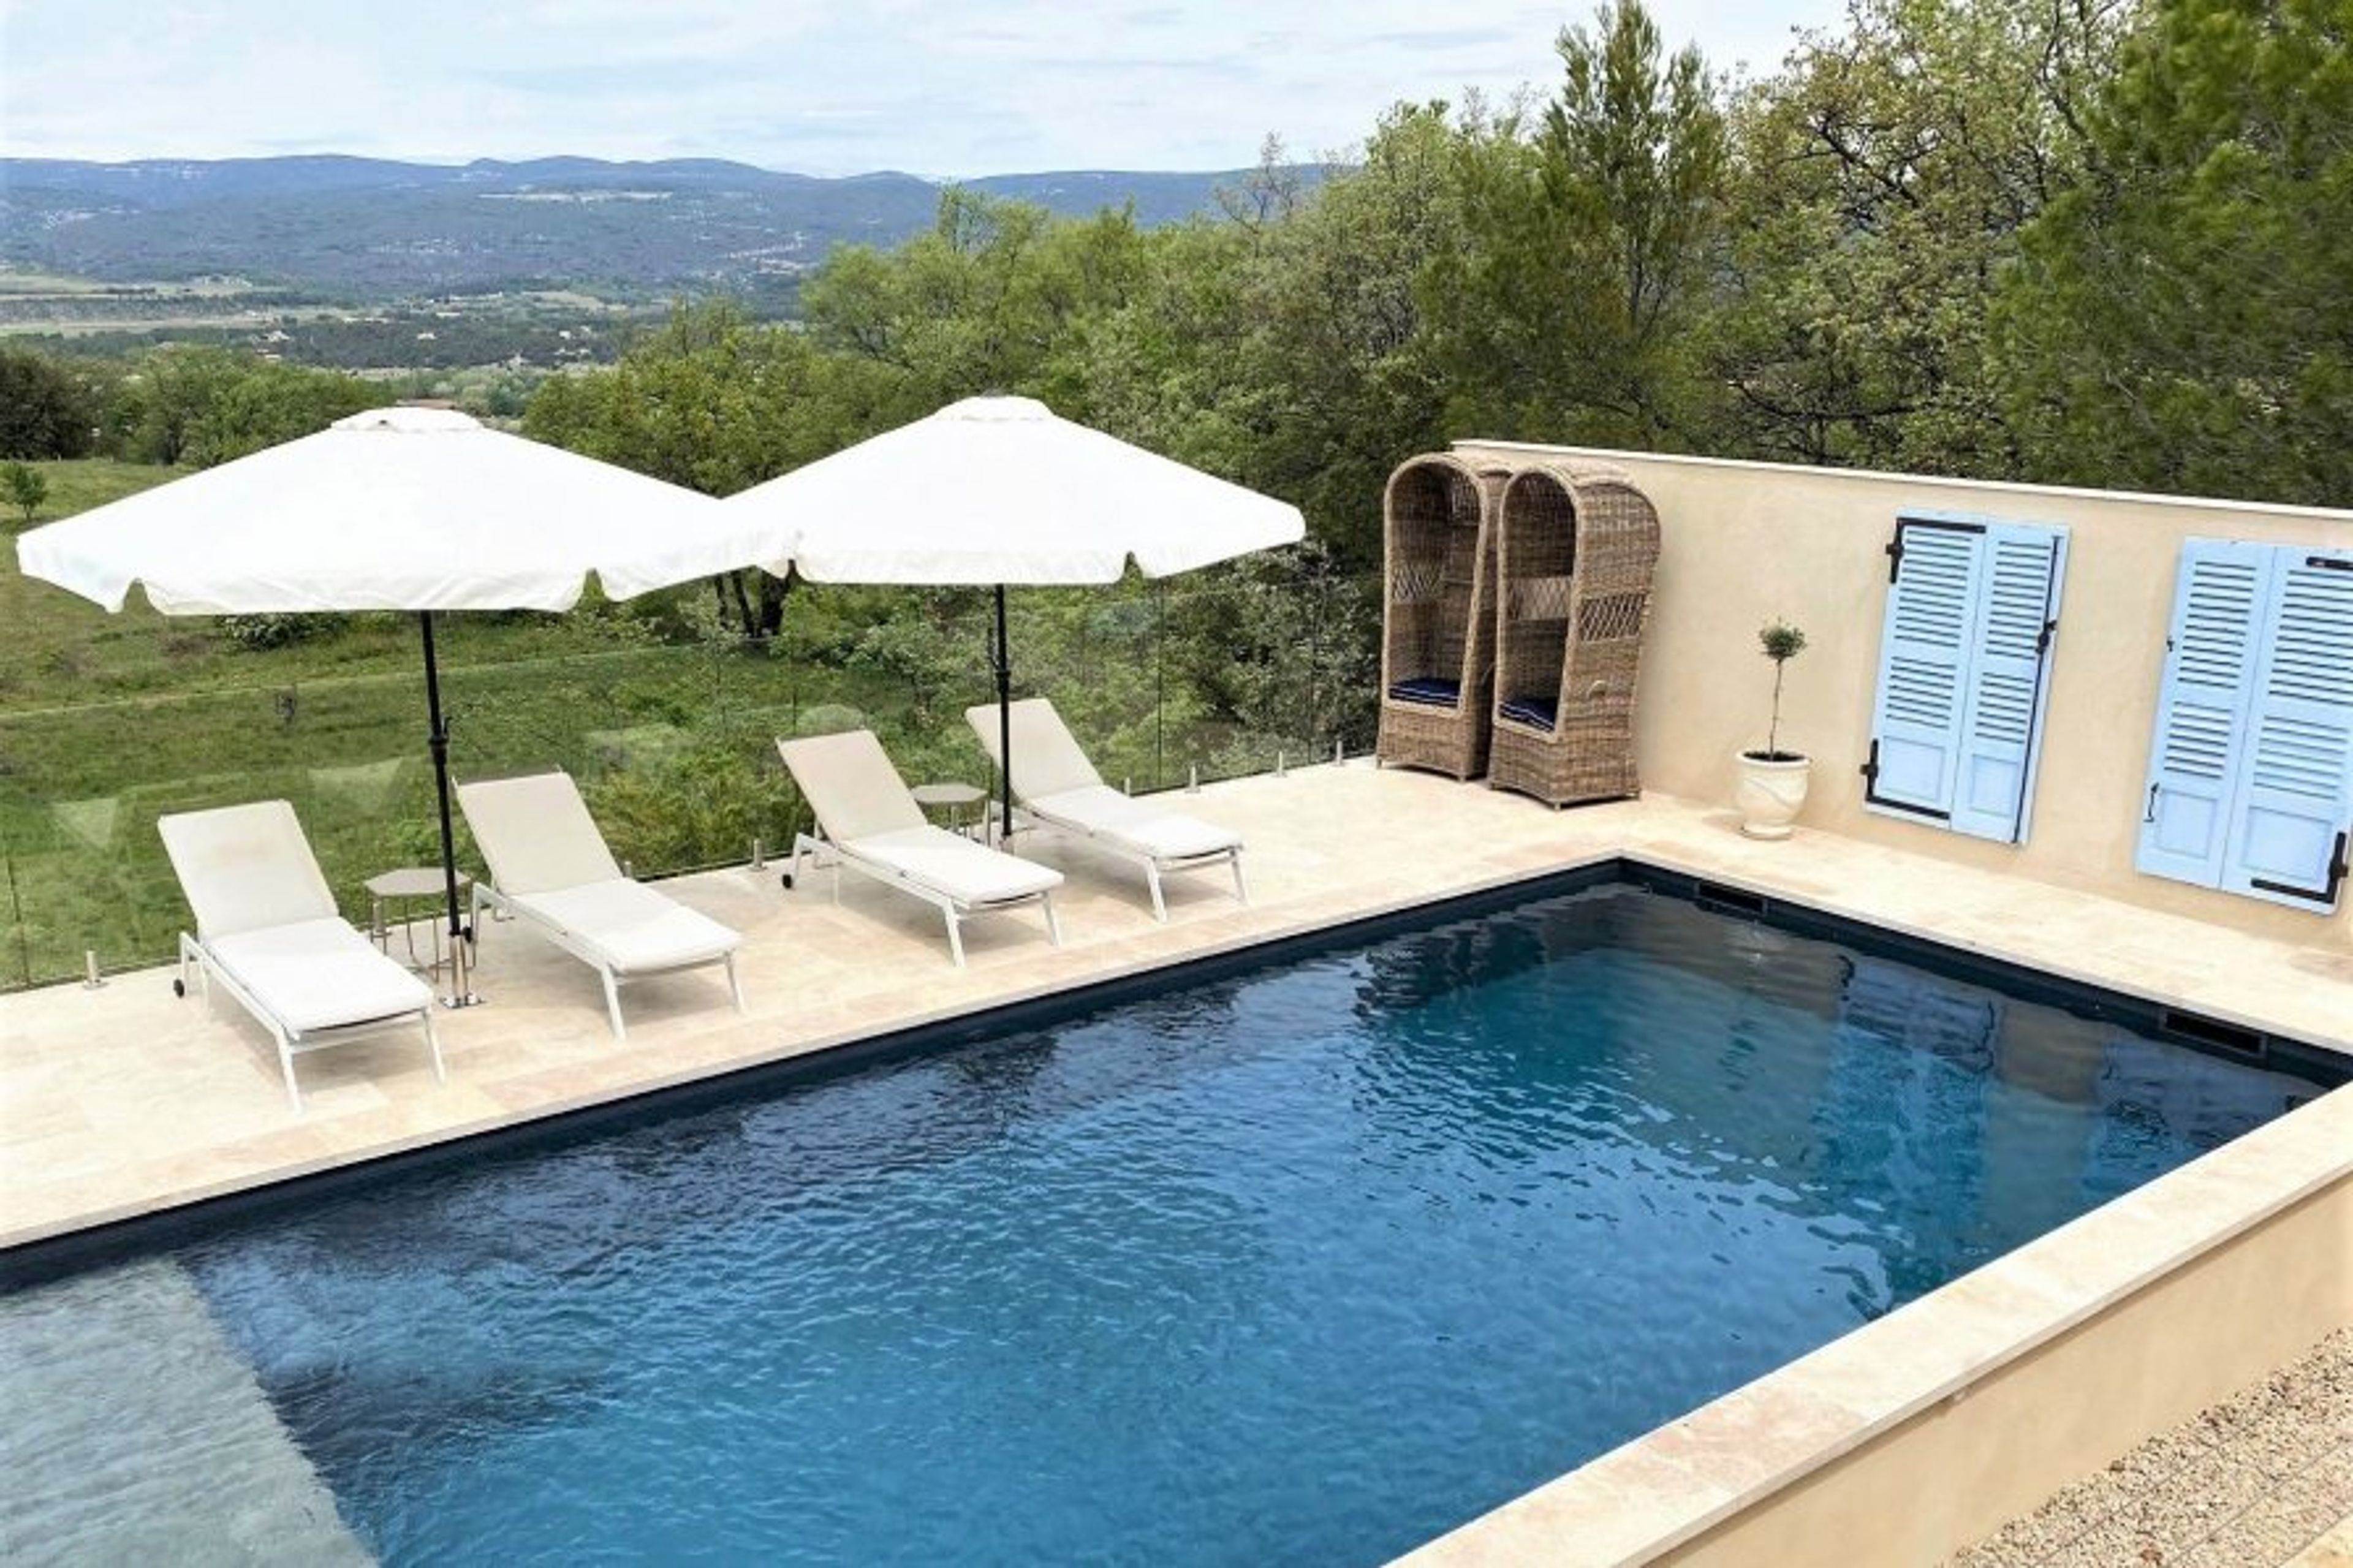 Relax in our St Tropez cane chairs